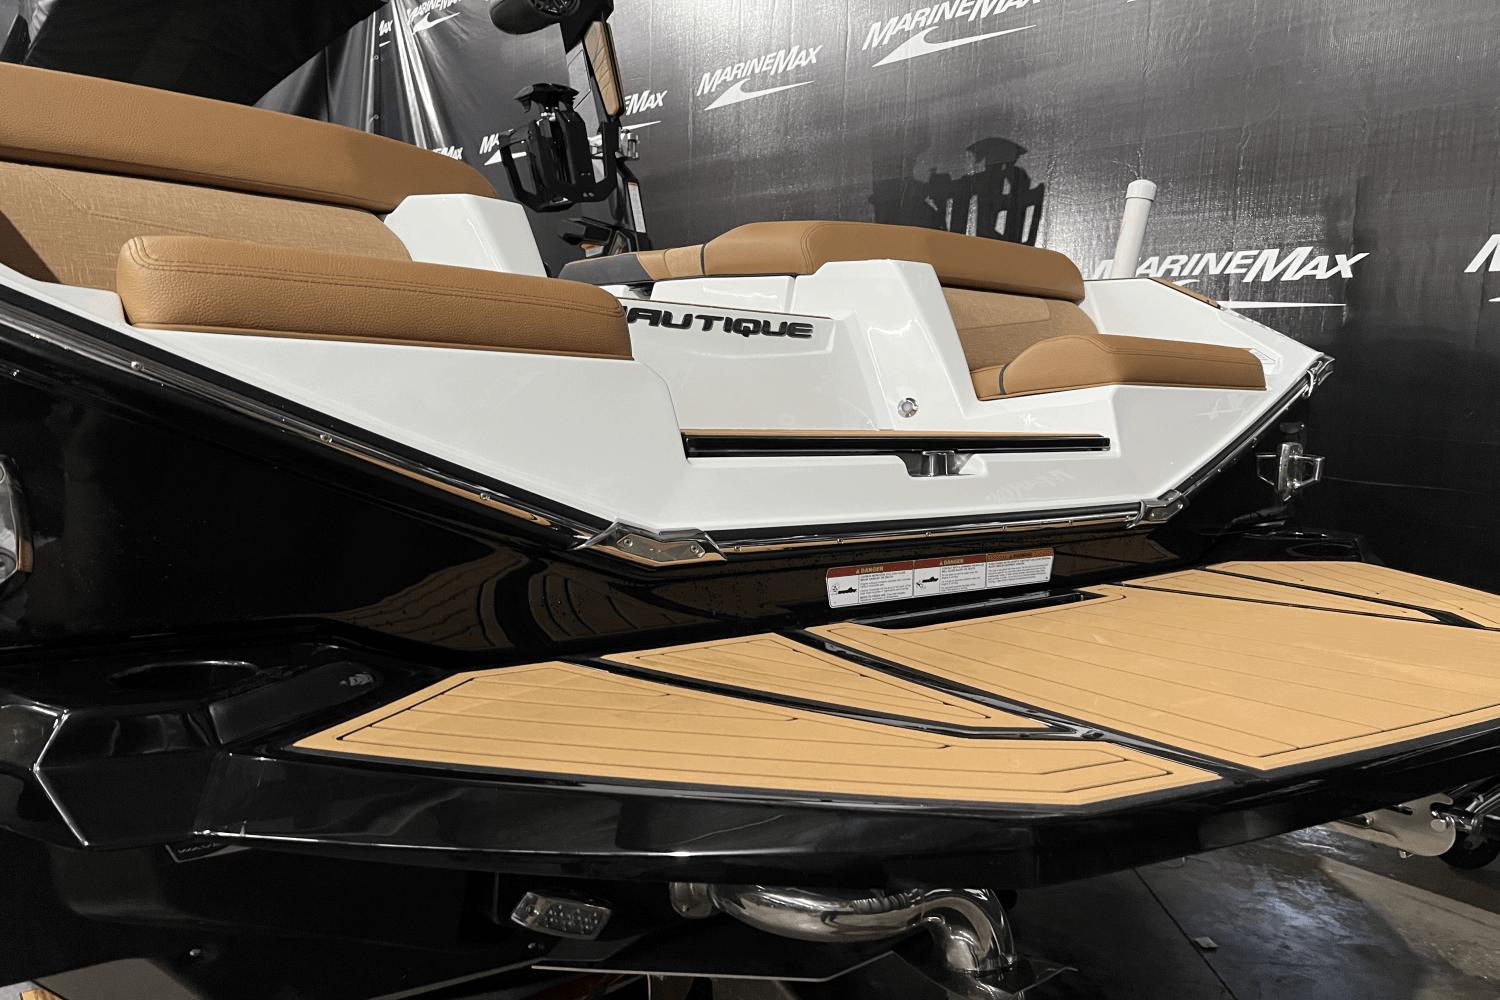 2011 Regal 2500 For Sale at MarineMax Rogers, MN 